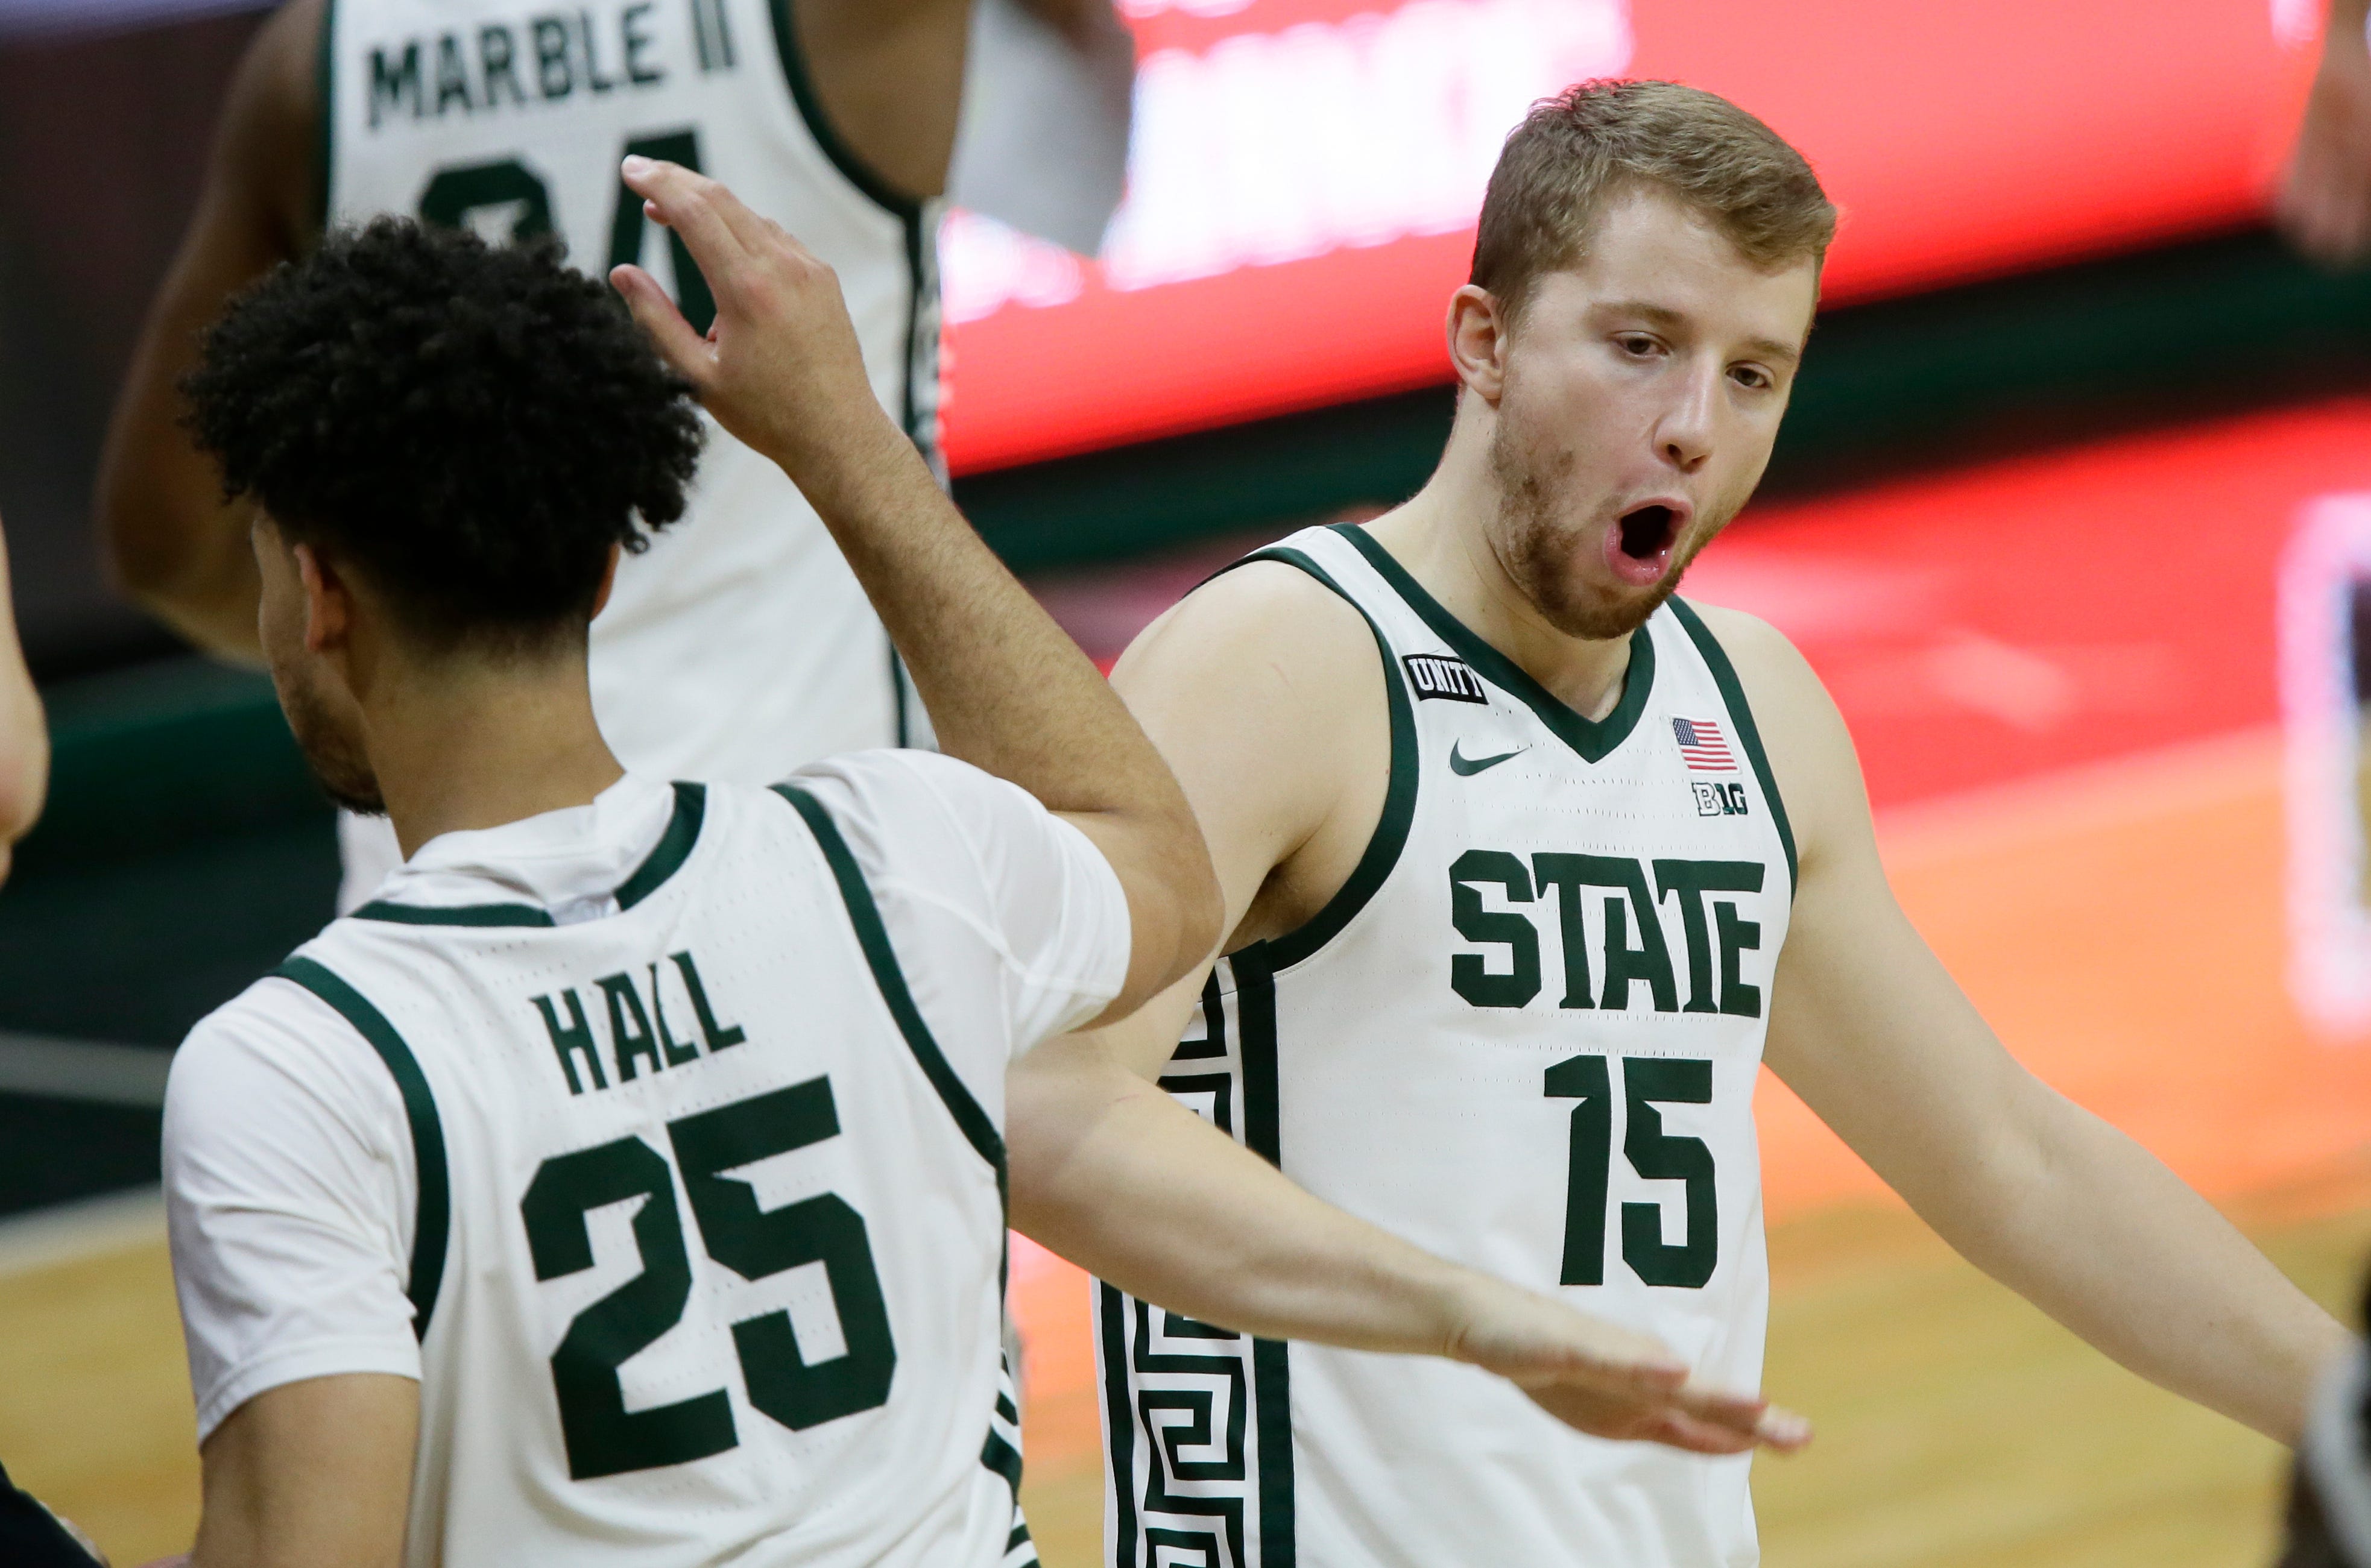 Michigan State forward Thomas Kithier (15) celebrates with forward Malik Hall (25) after a win over Ohio State in an NCAA college basketball game Thursday, Feb. 25, 2021, in East Lansing, Mich.